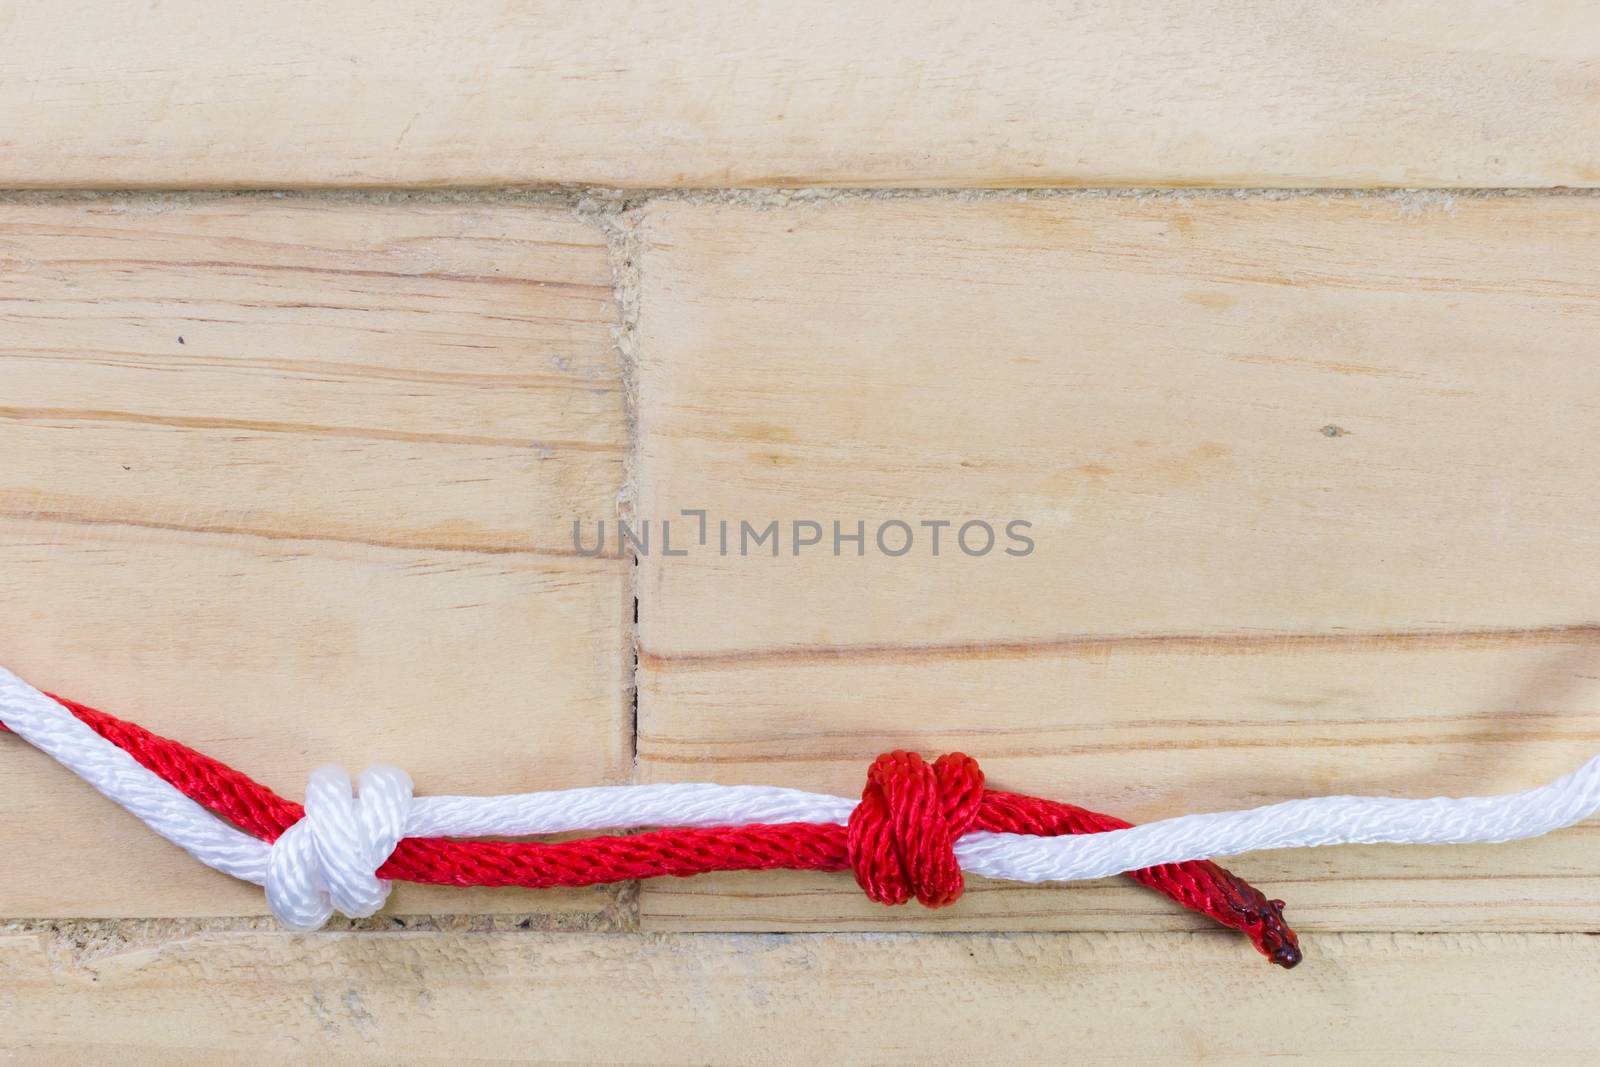 fisherman's knot made with red rope on wooden background